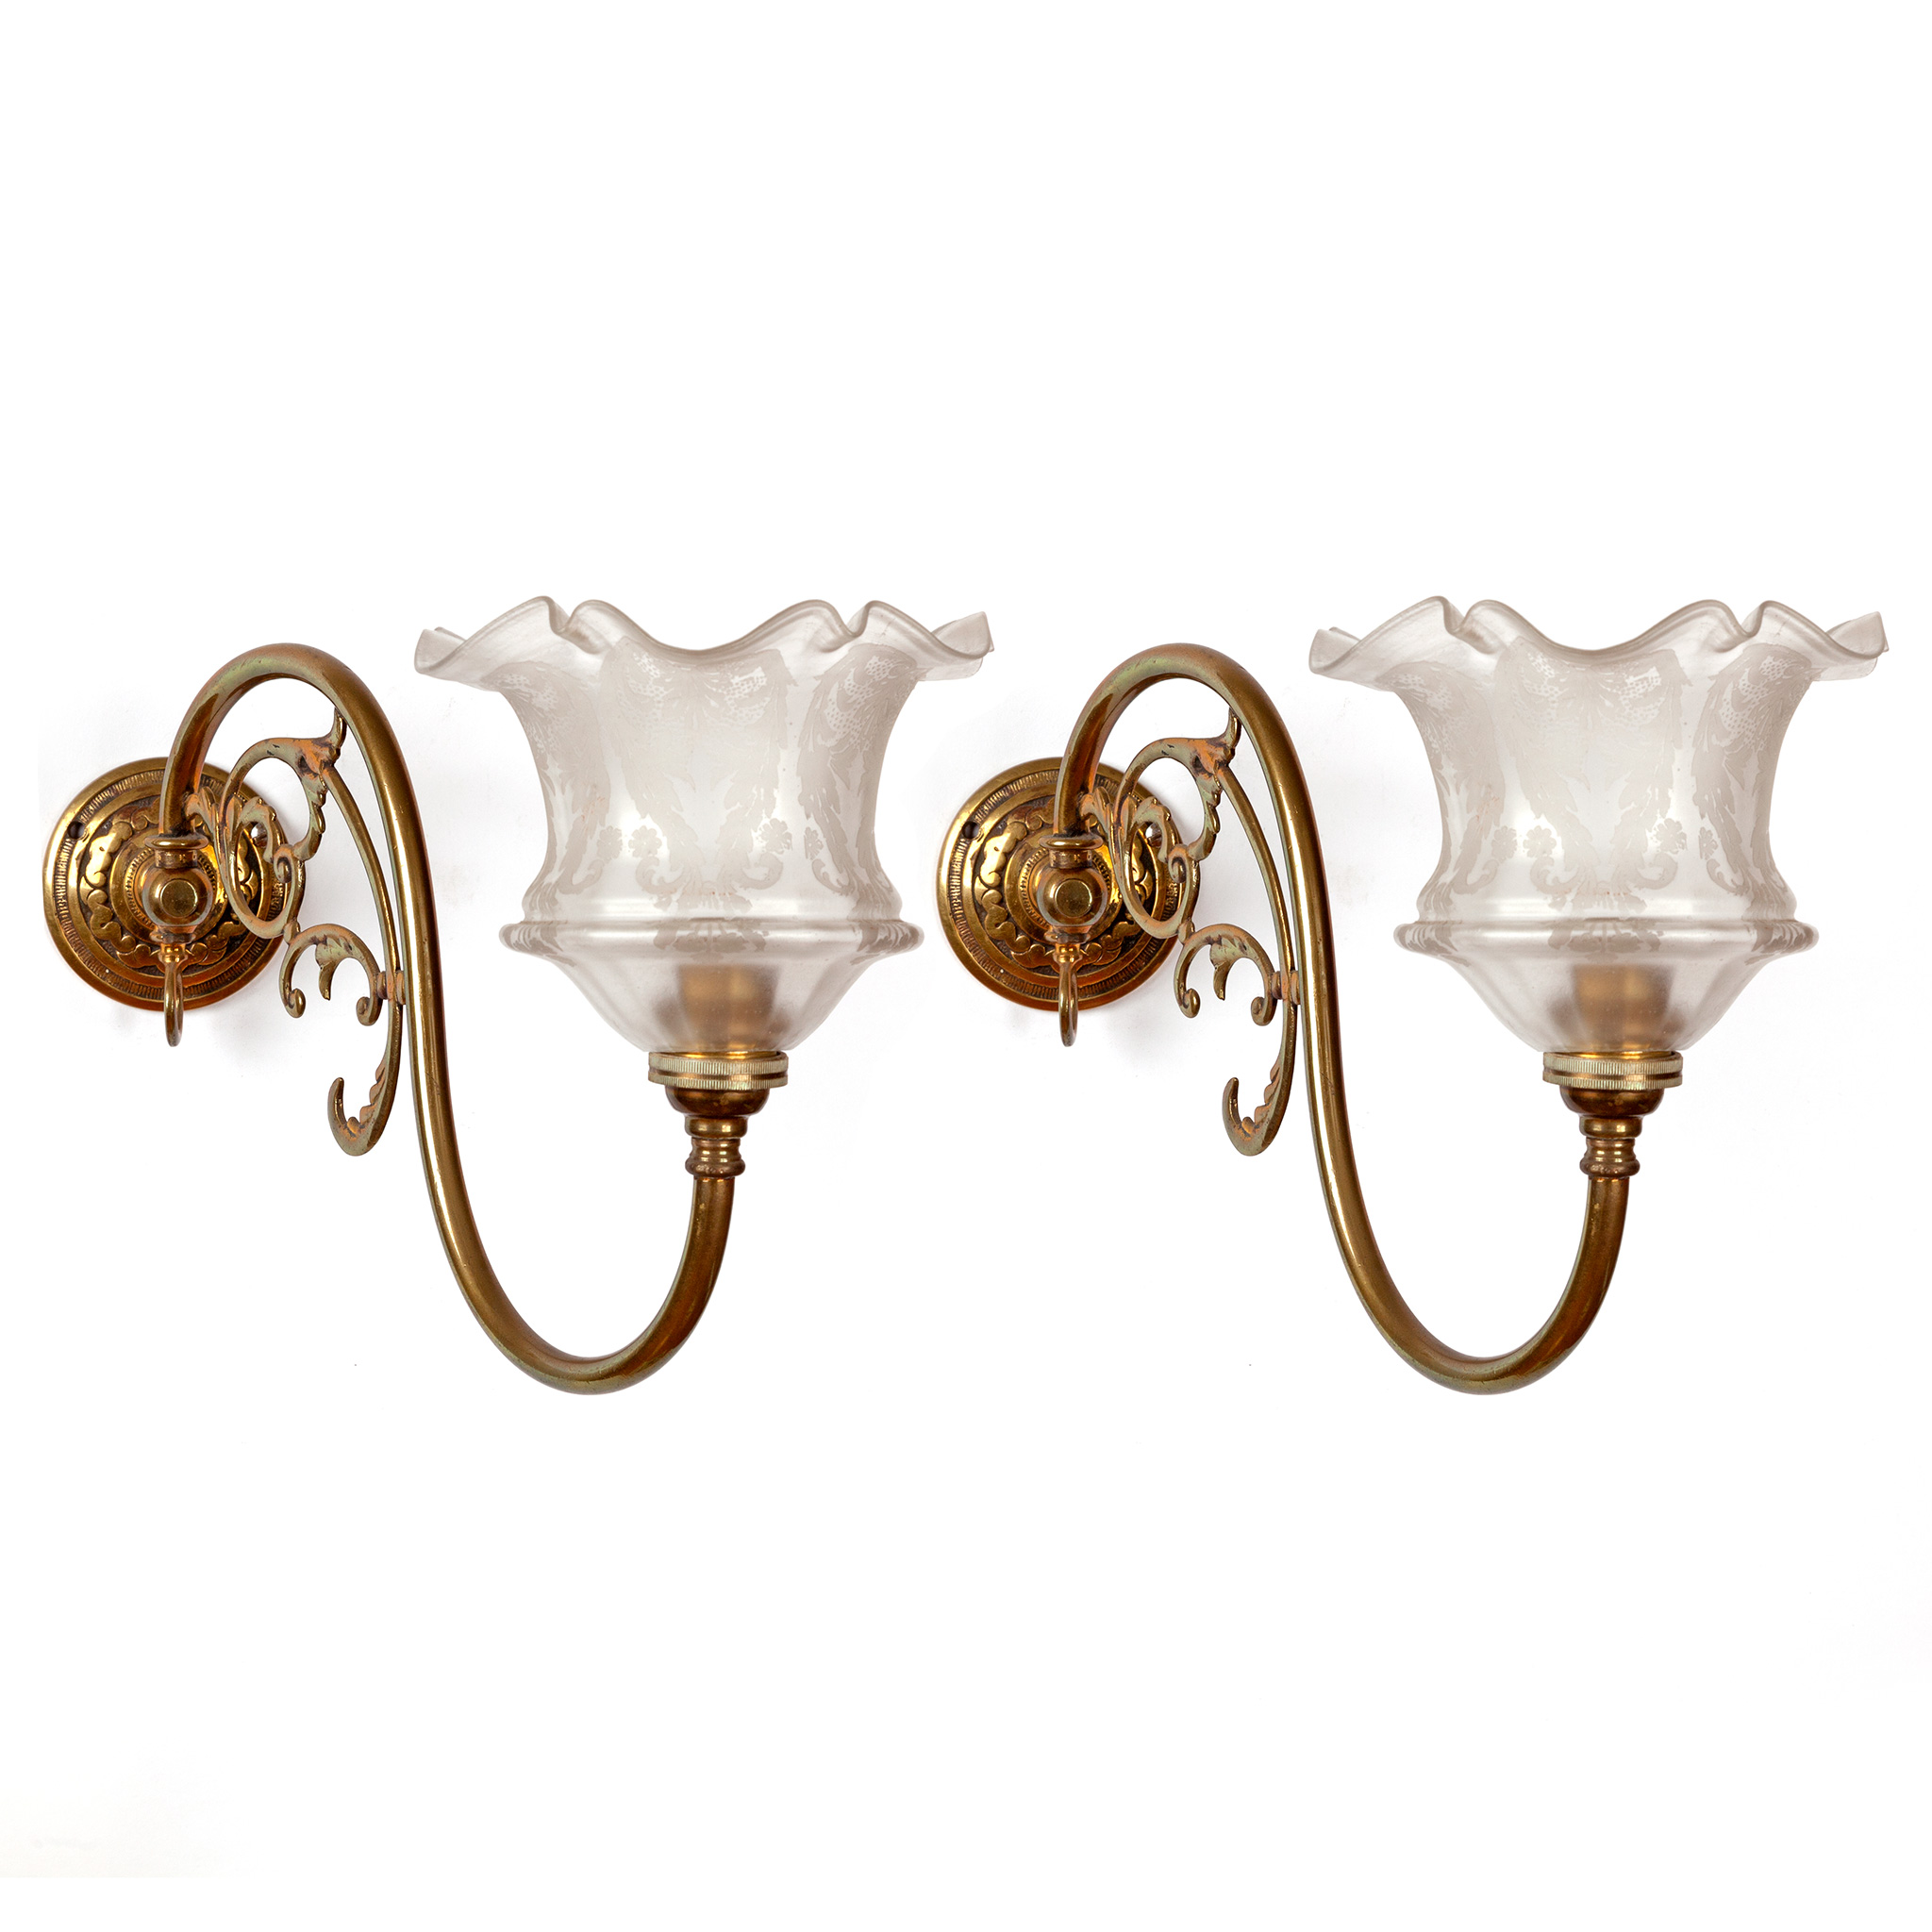 Pair of Decorative Victorian Swivelling Brass Wall Lights with Finely Etched Frosted Fluted Shades